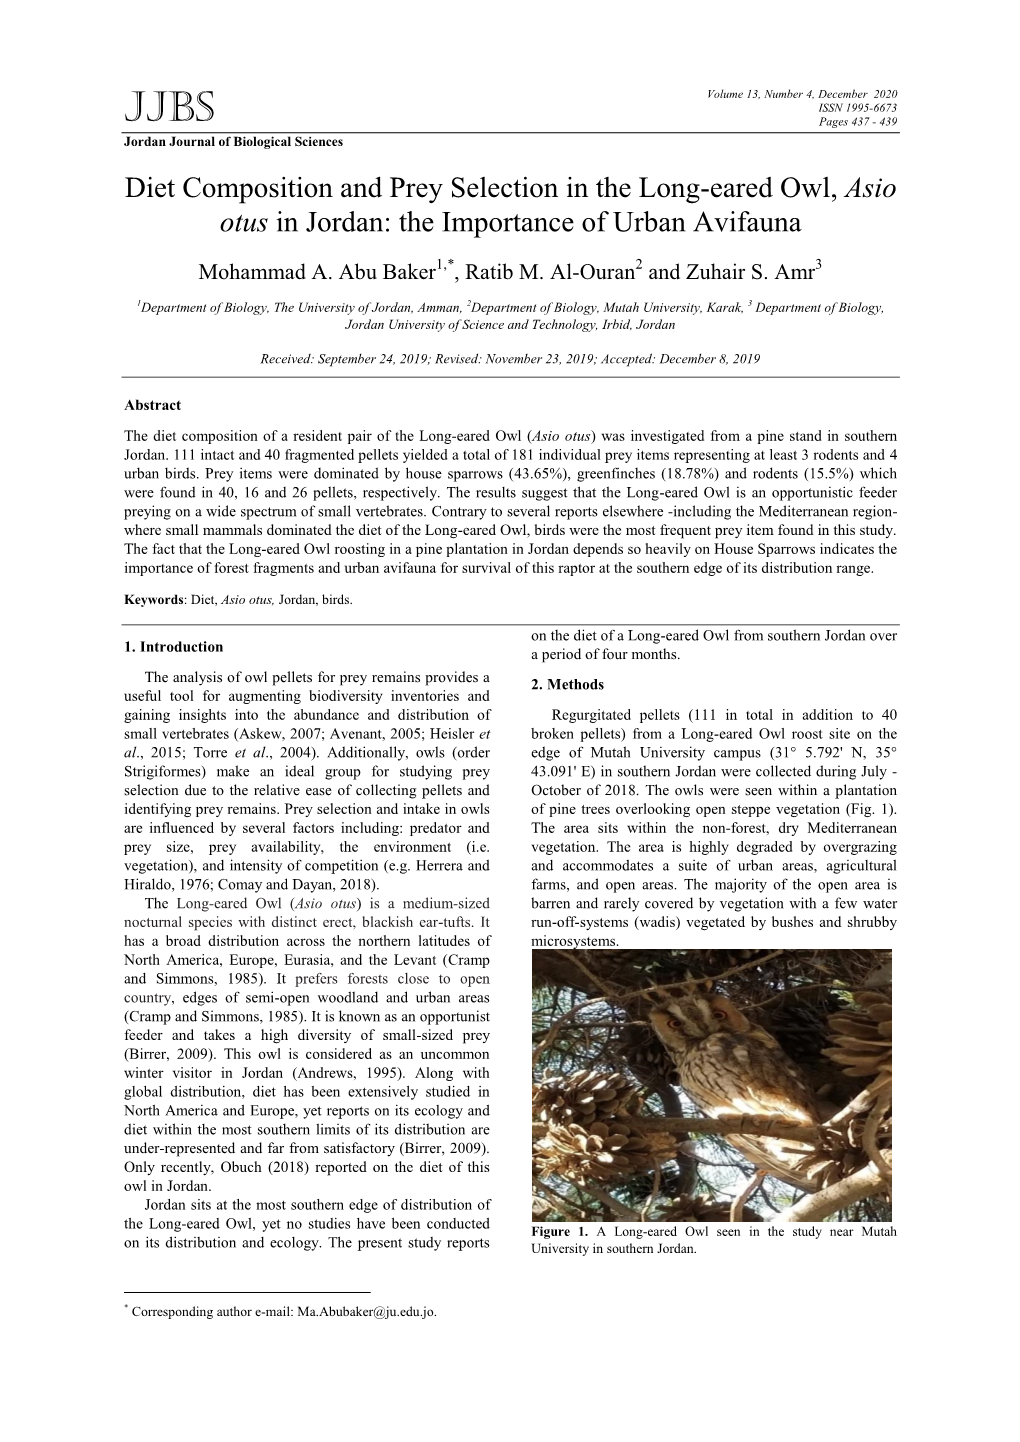 Diet Composition and Prey Selection in the Long-Eared Owl, Asio Otus in Jordan: the Importance of Urban Avifauna